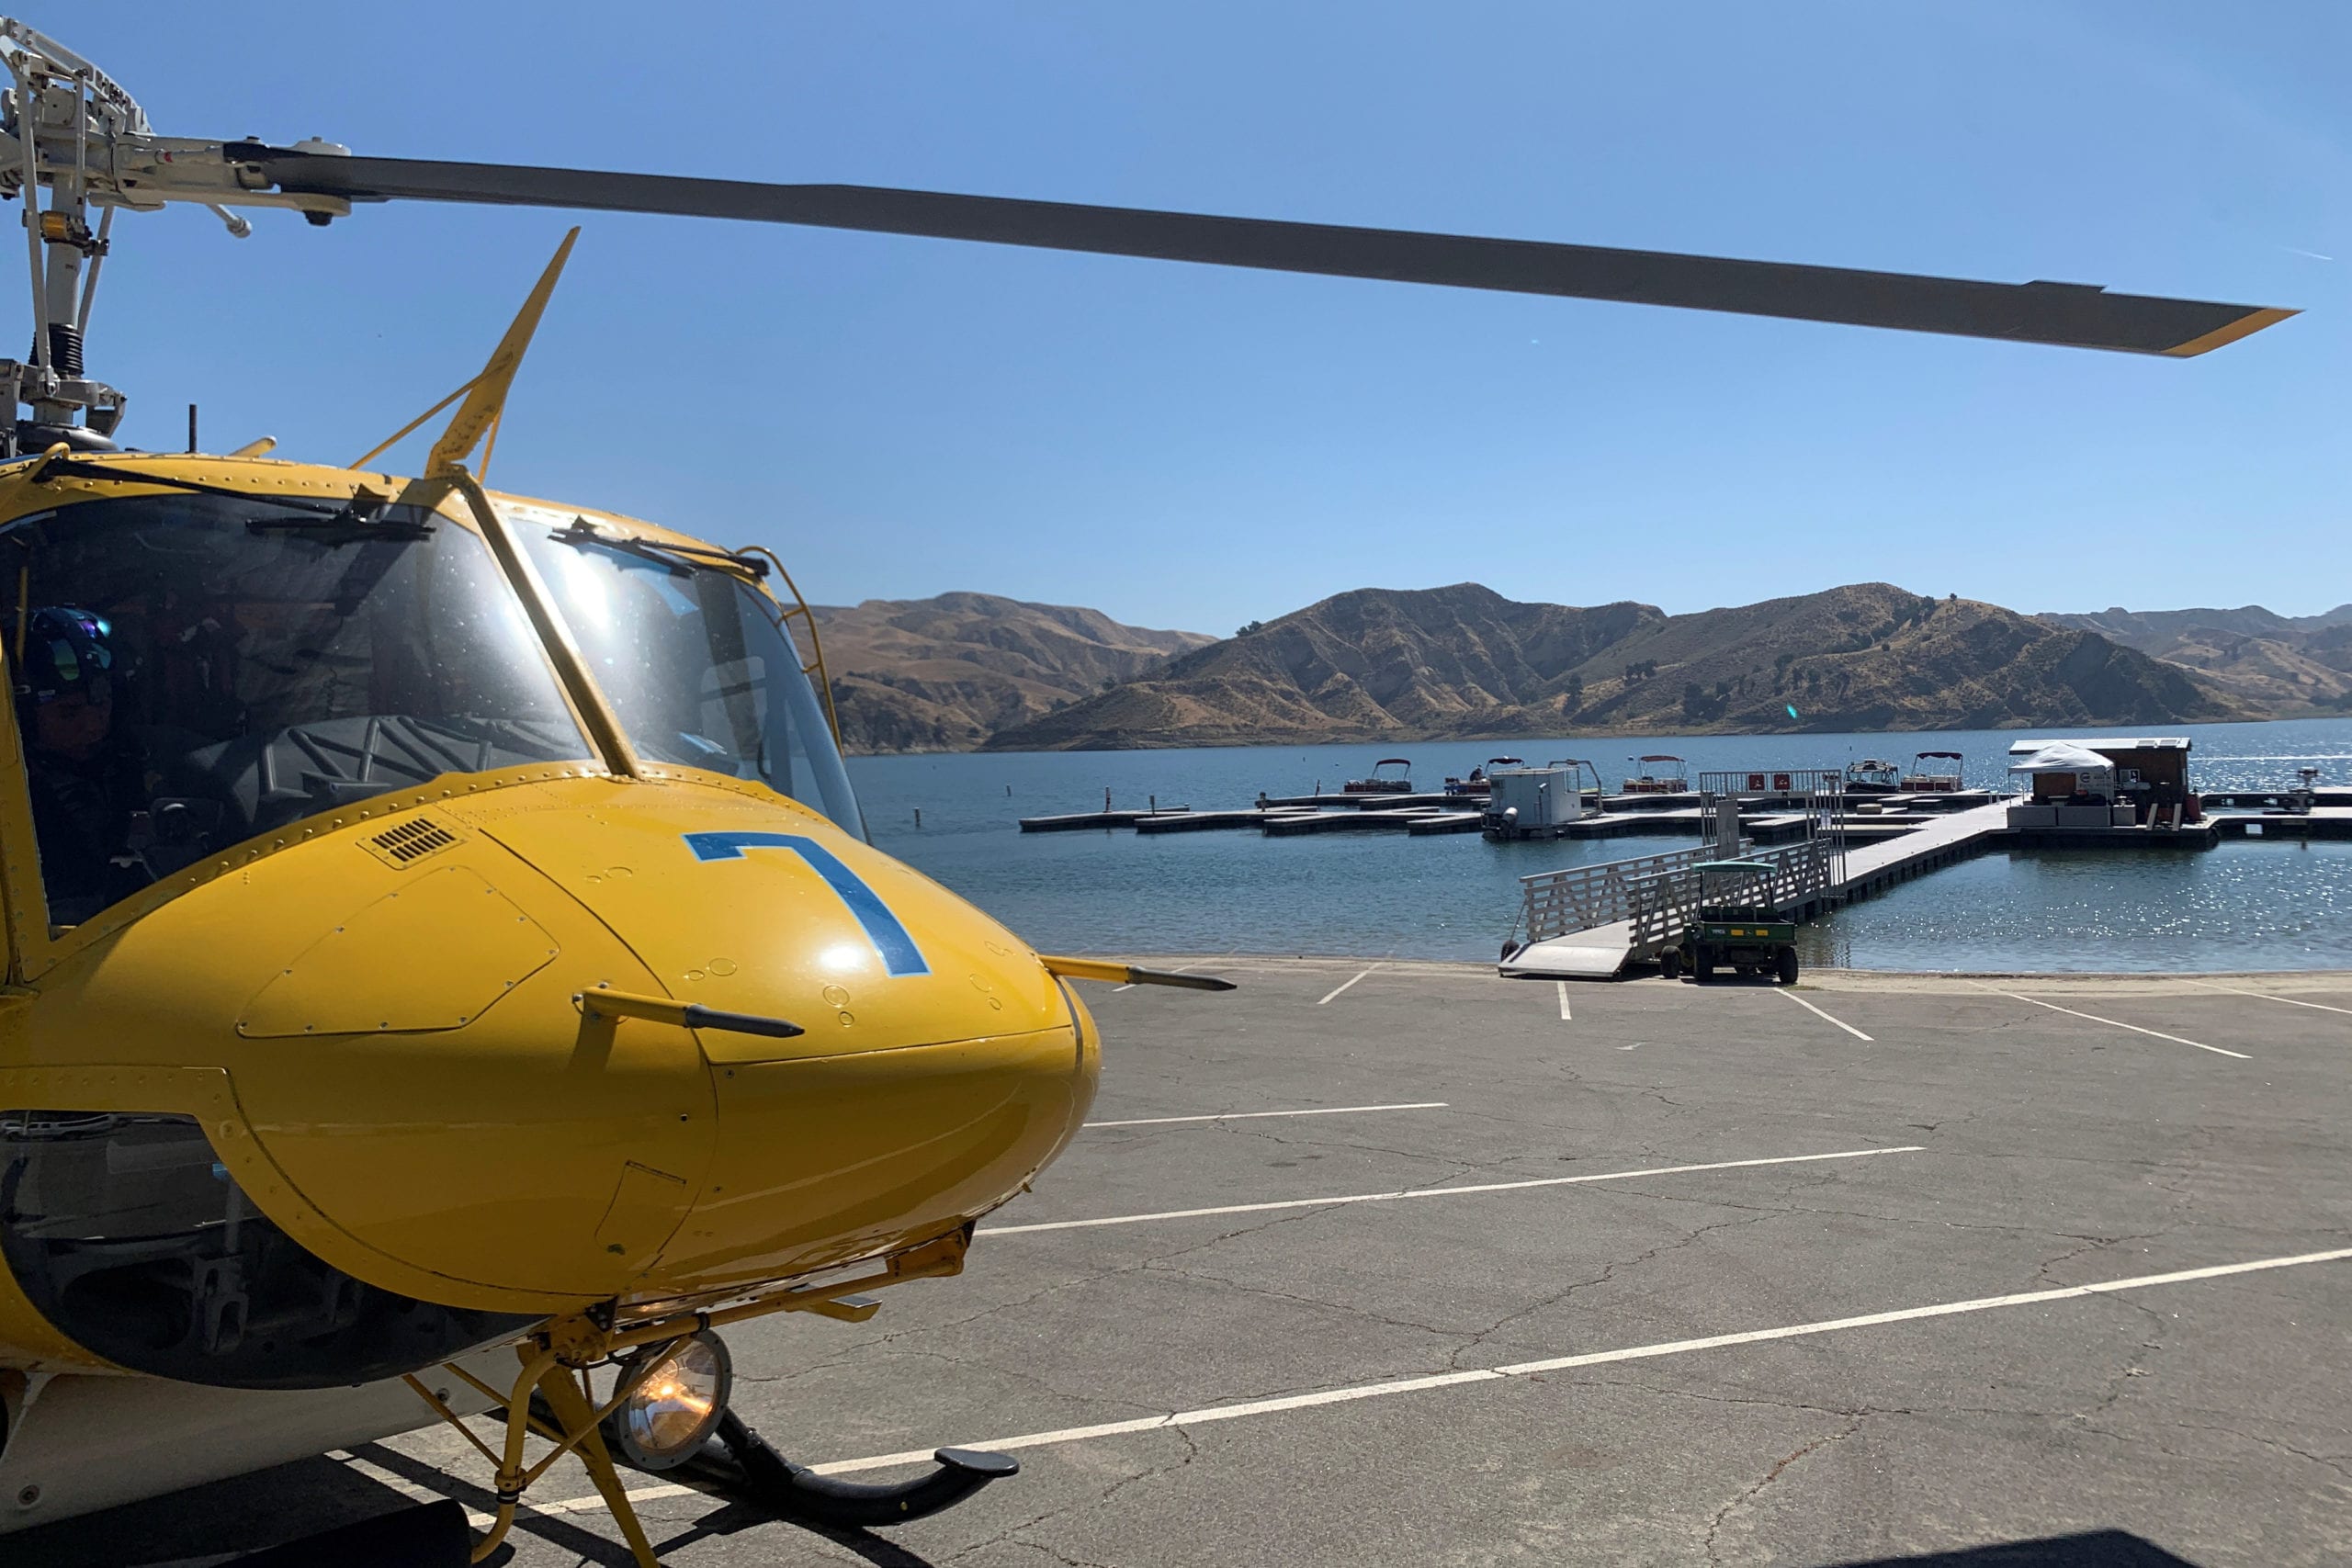 A Ventura County Sheriff's Office helicopter is parked during a search for former "Glee" star Naya Rivera, who went missing on Lake Piru, north of Los Angeles, California, U.S. July 9, 2020.  Ventura County Sheriff's Office/Handout via REUTERS